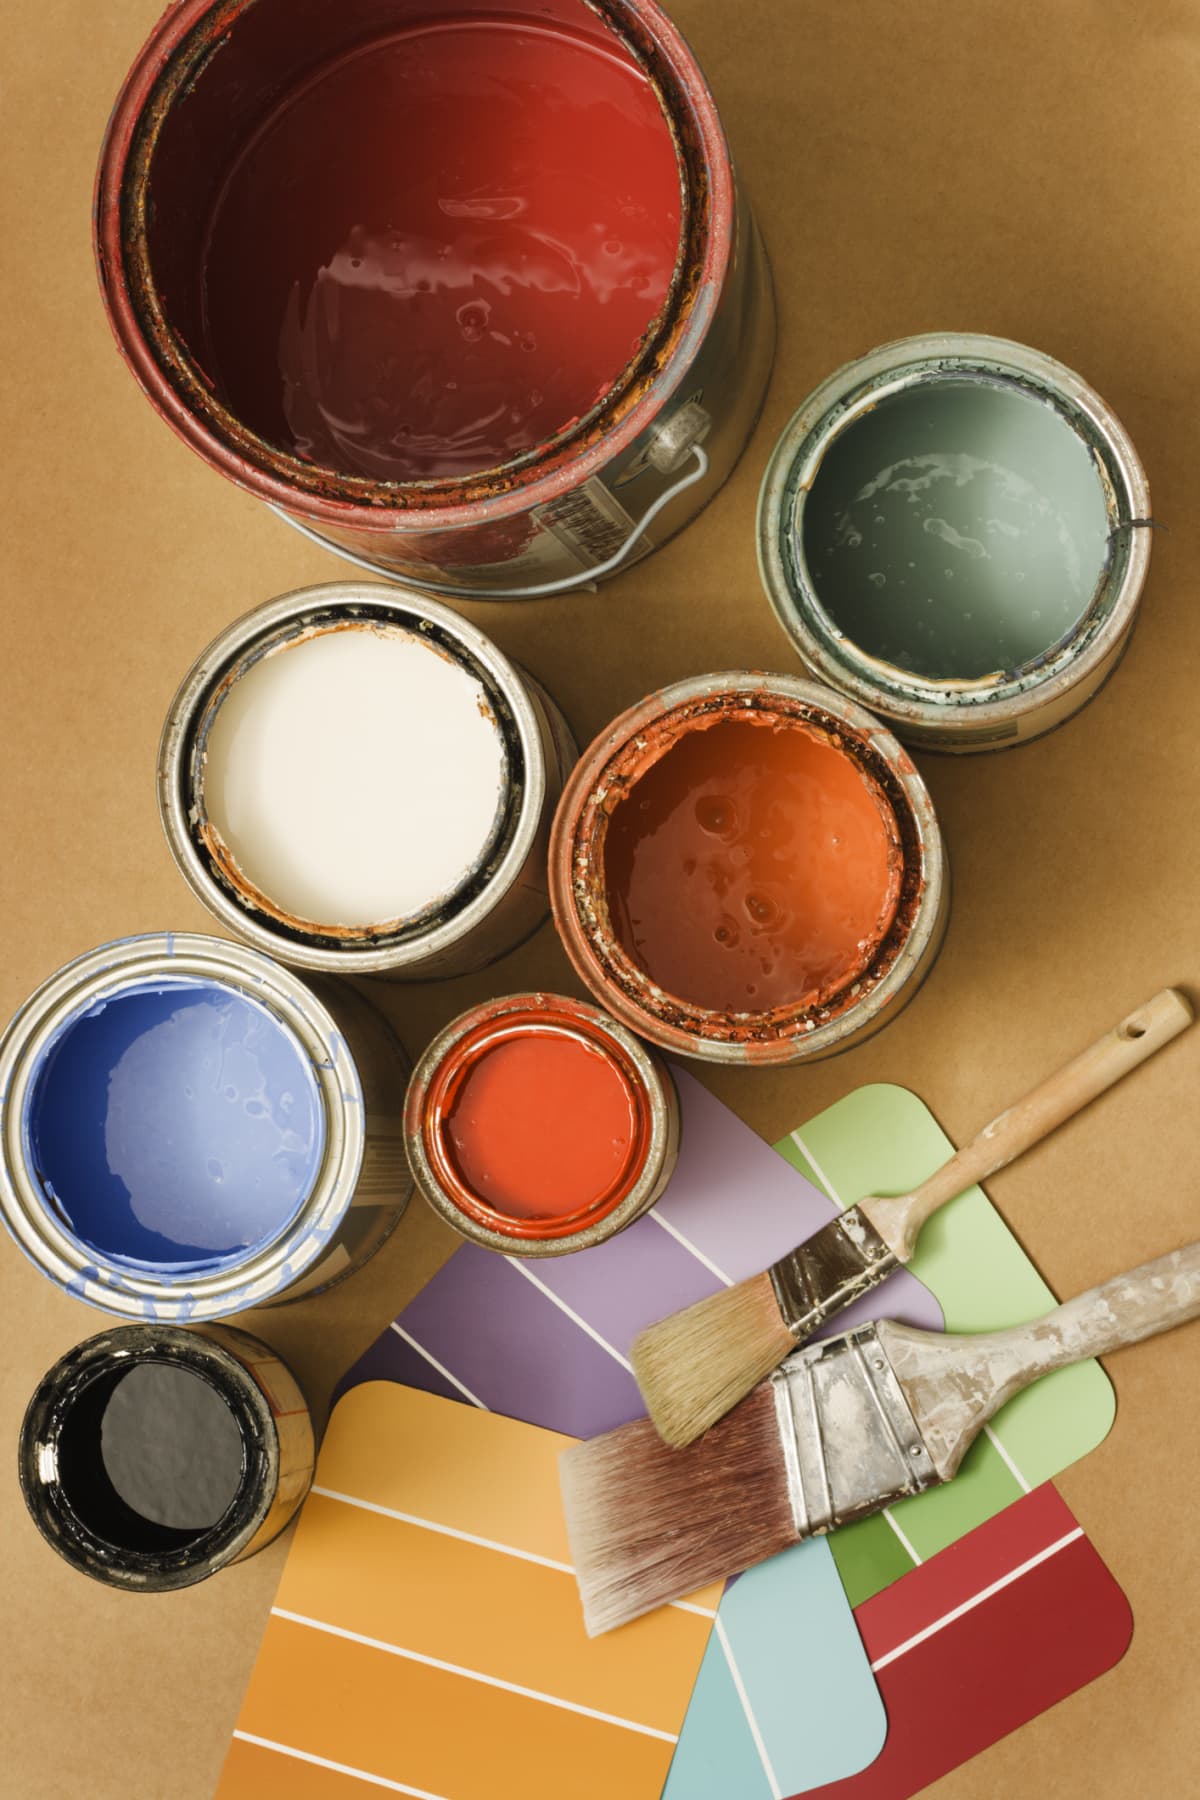 Open paint cans, paintbrushes and color swatches in preparation for home decorating and home improvement painting projects. Some containers are old, with crusted latex paint on bucket edges. Color coordination choices may create decor ideas. Vertical format still life of group of objects, viewed from directly above, with no people.